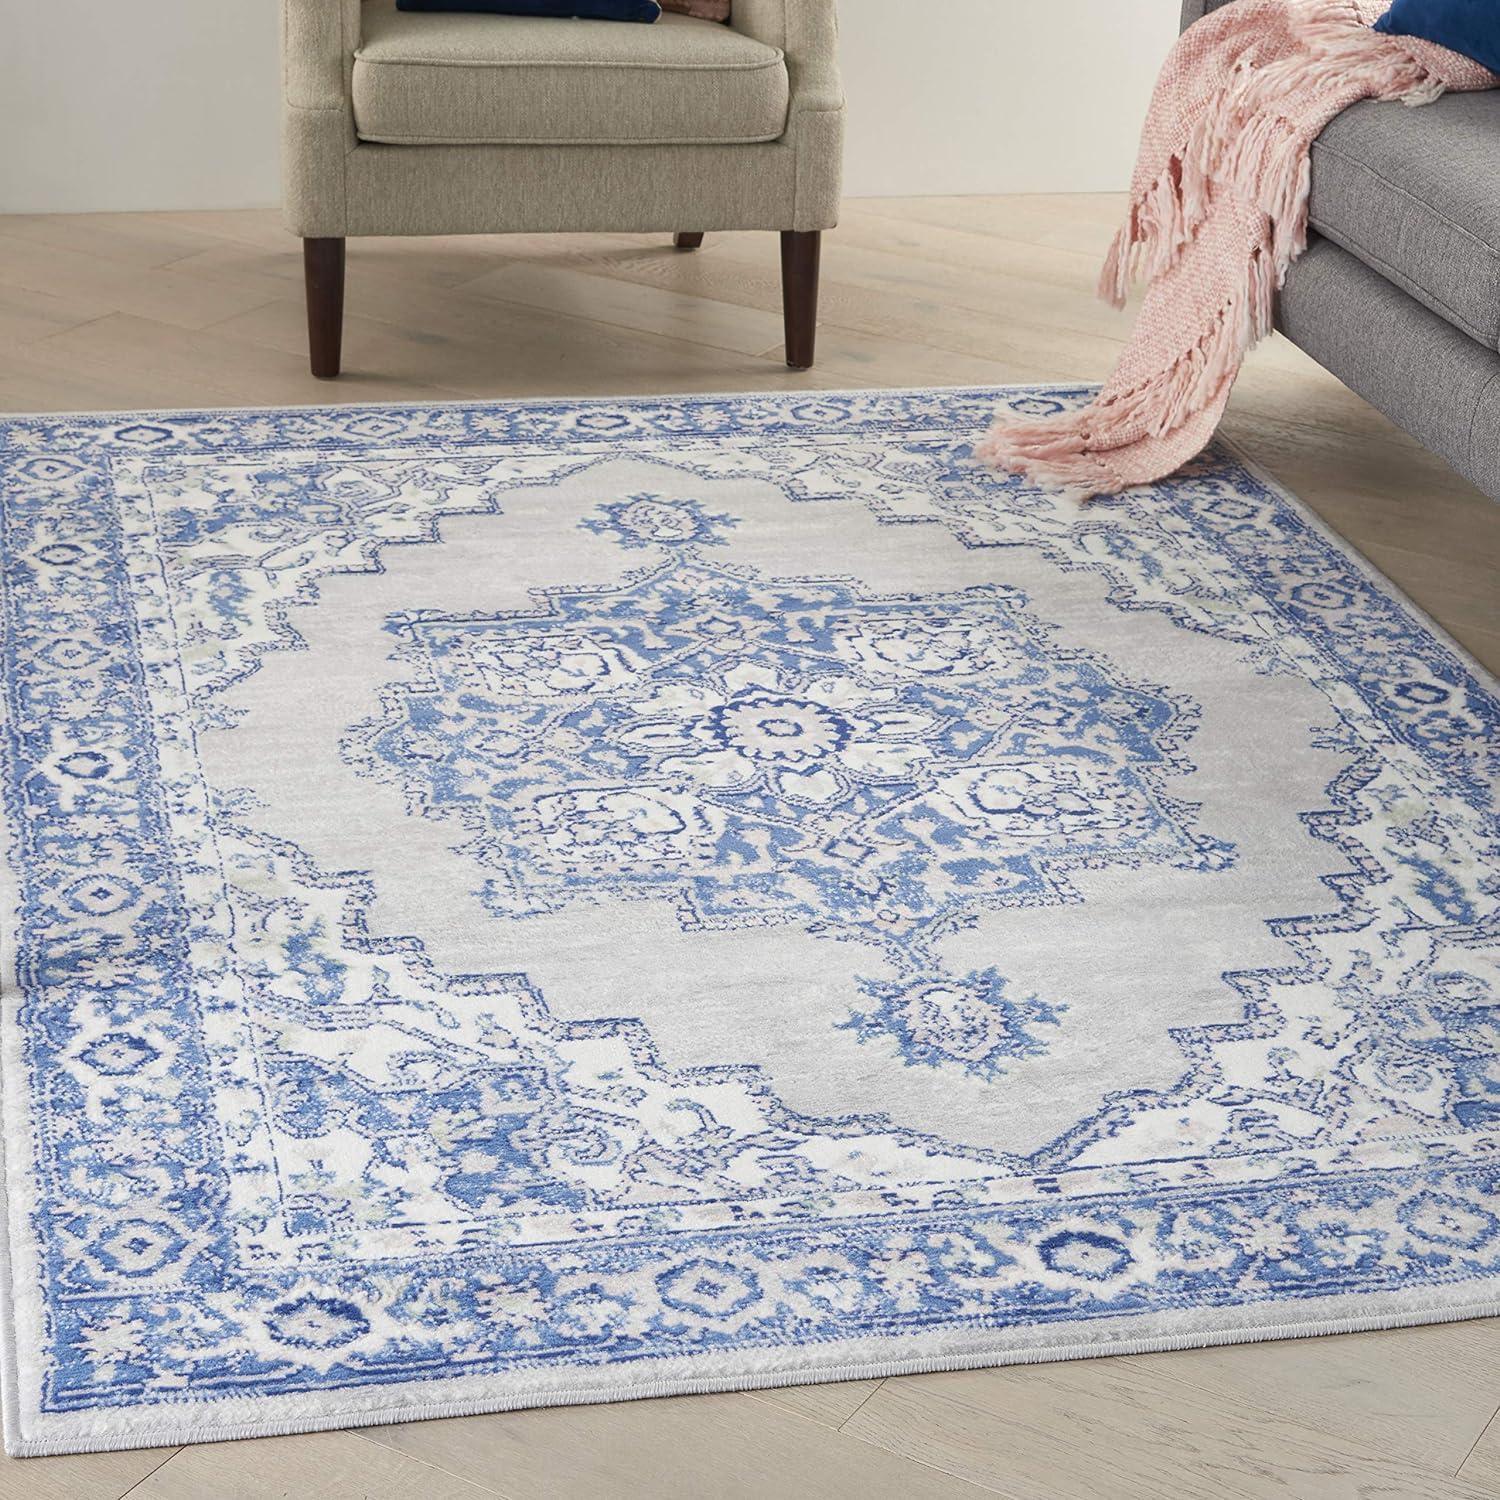 Grey Blue Floral Motif 6' x 9' Easy-Care Synthetic Area Rug